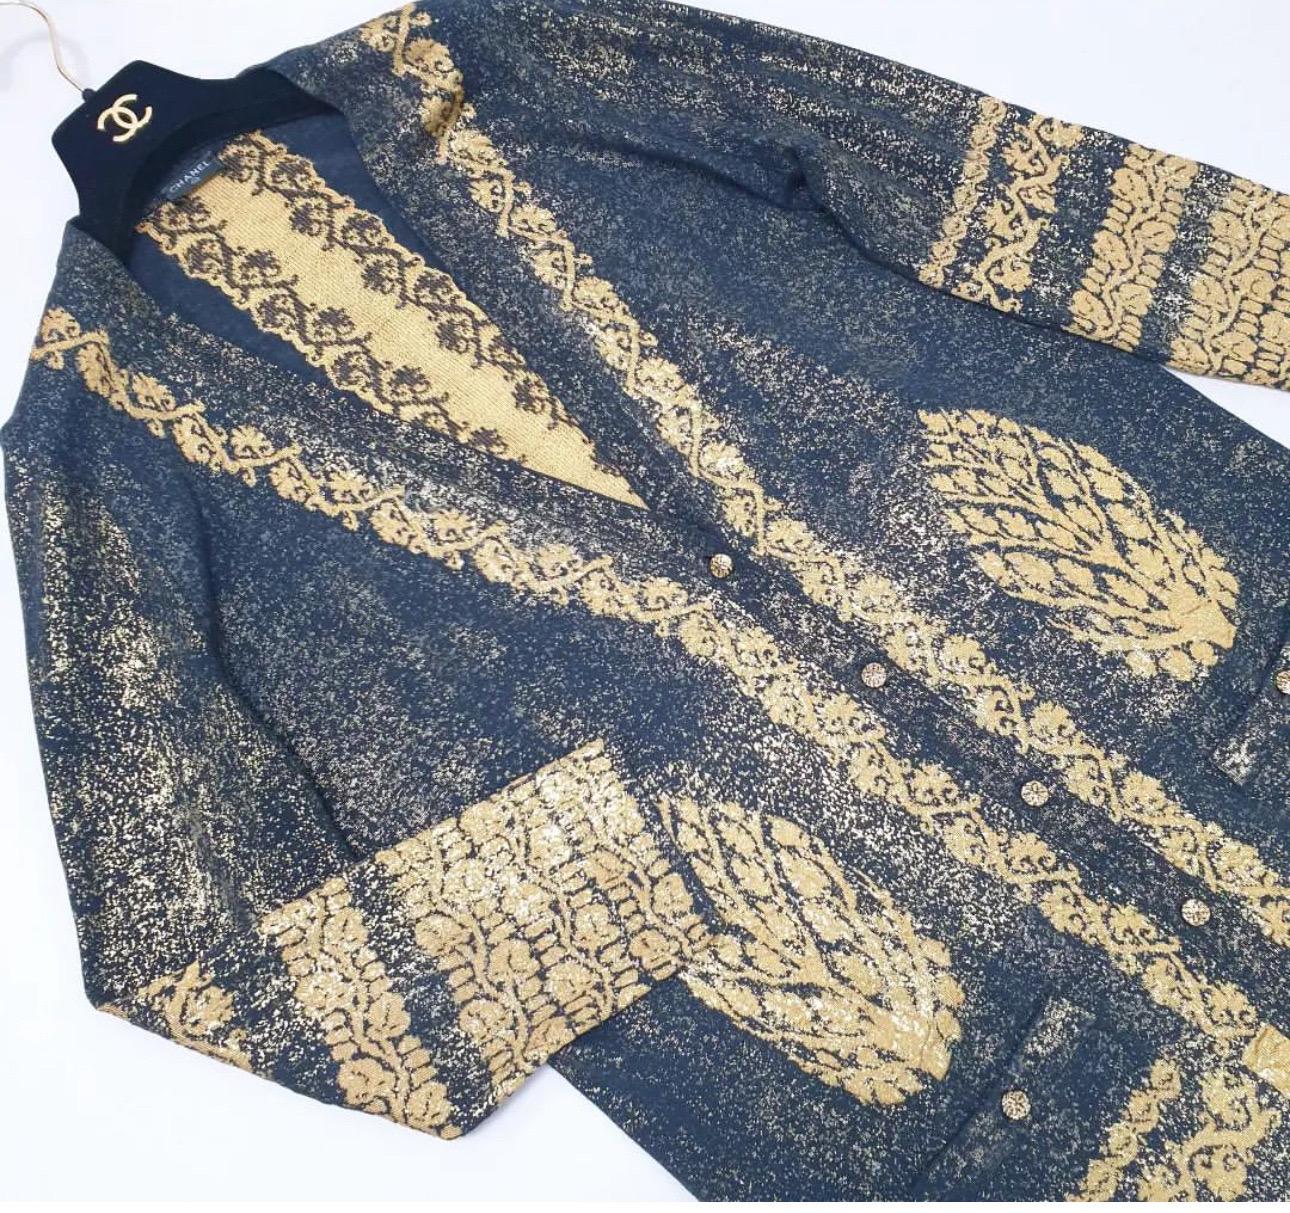 Chanel Knit Jacquard Print Long Sleeve Dress Cardigan  In Good Condition For Sale In Krakow, PL